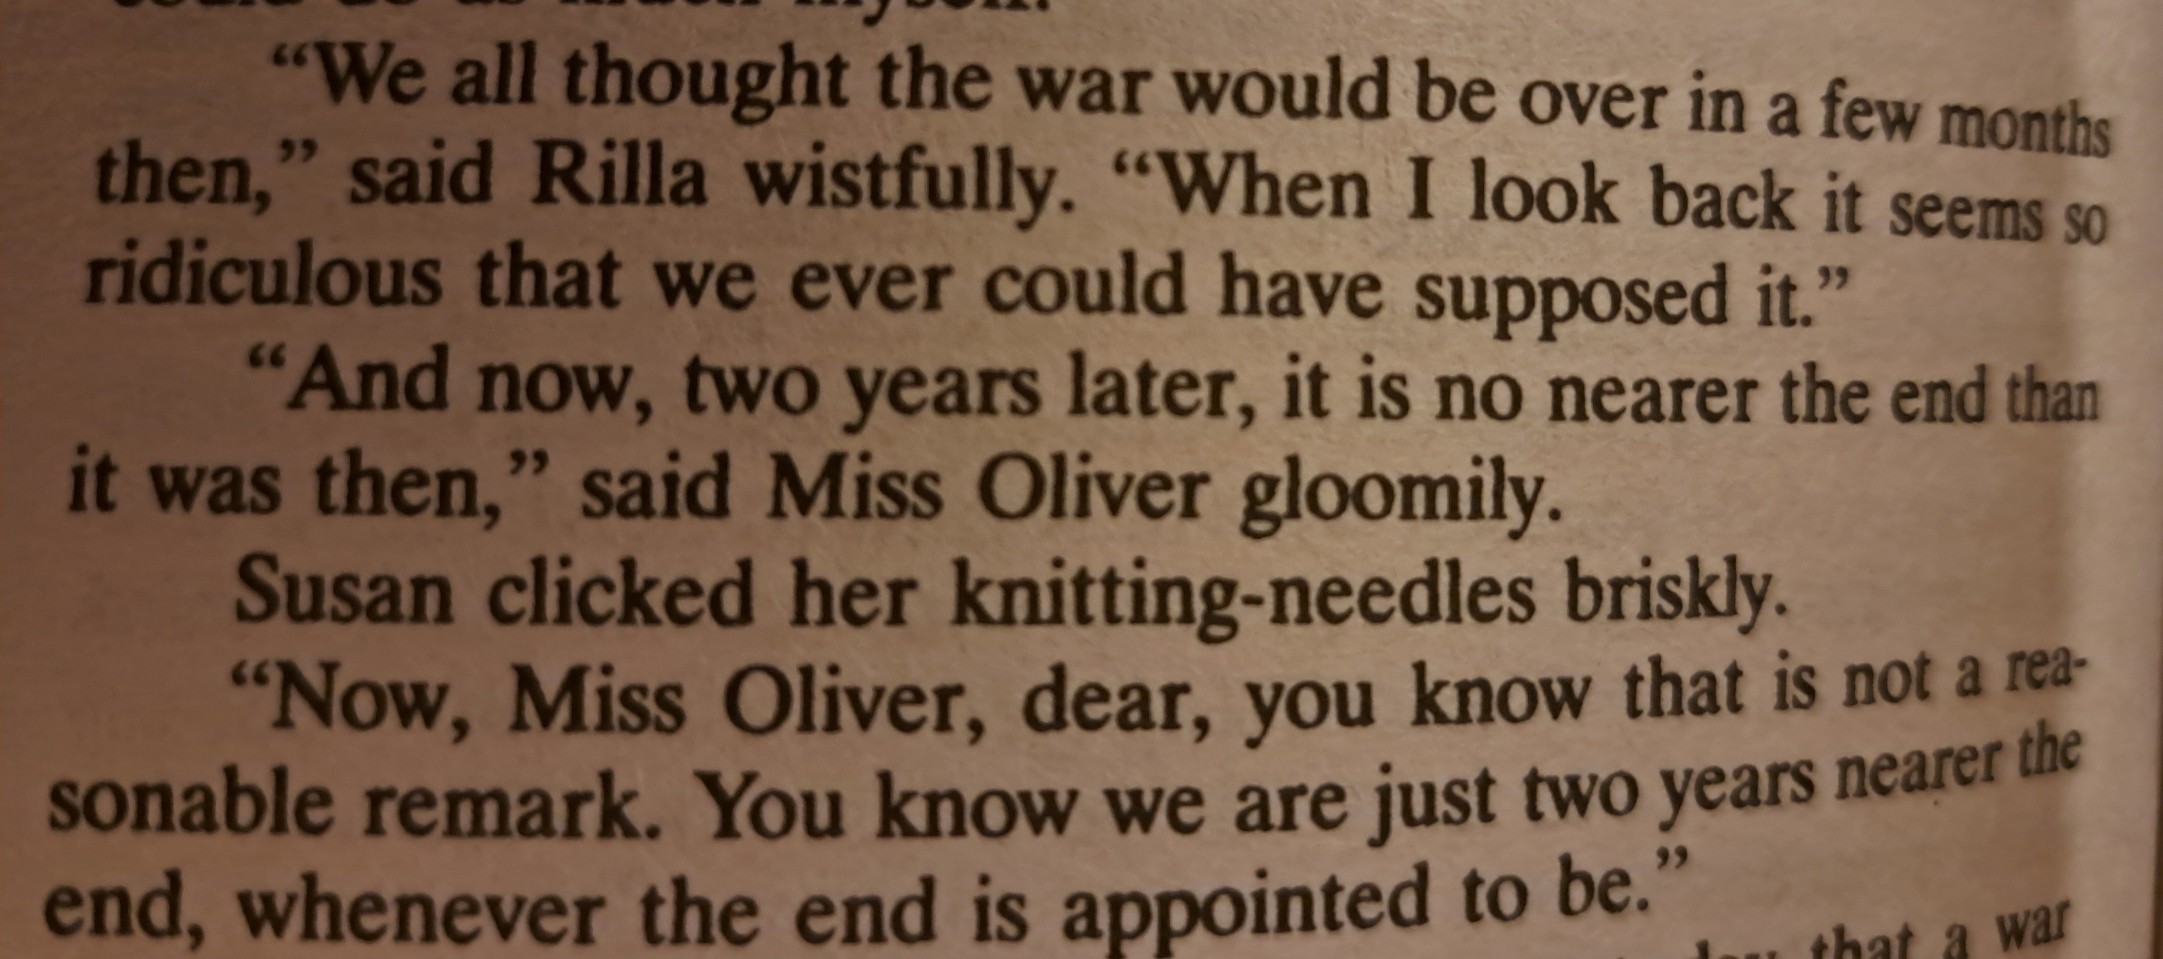 "We all thought the war would be over in a few months then," said Rilla wistfully. "When I look back it seems so ridiculous that we ever could have supposed it."  "And now, two years later, it is no nearer the end than it was then," said Miss Oliver gloomily.  Susan clicked her knitting-needles briskly.  "Now, Miss Oliver, dear, you know that is not a reasonable remark. You know we are just two years nearer the end, whenever the end is appointed to be."